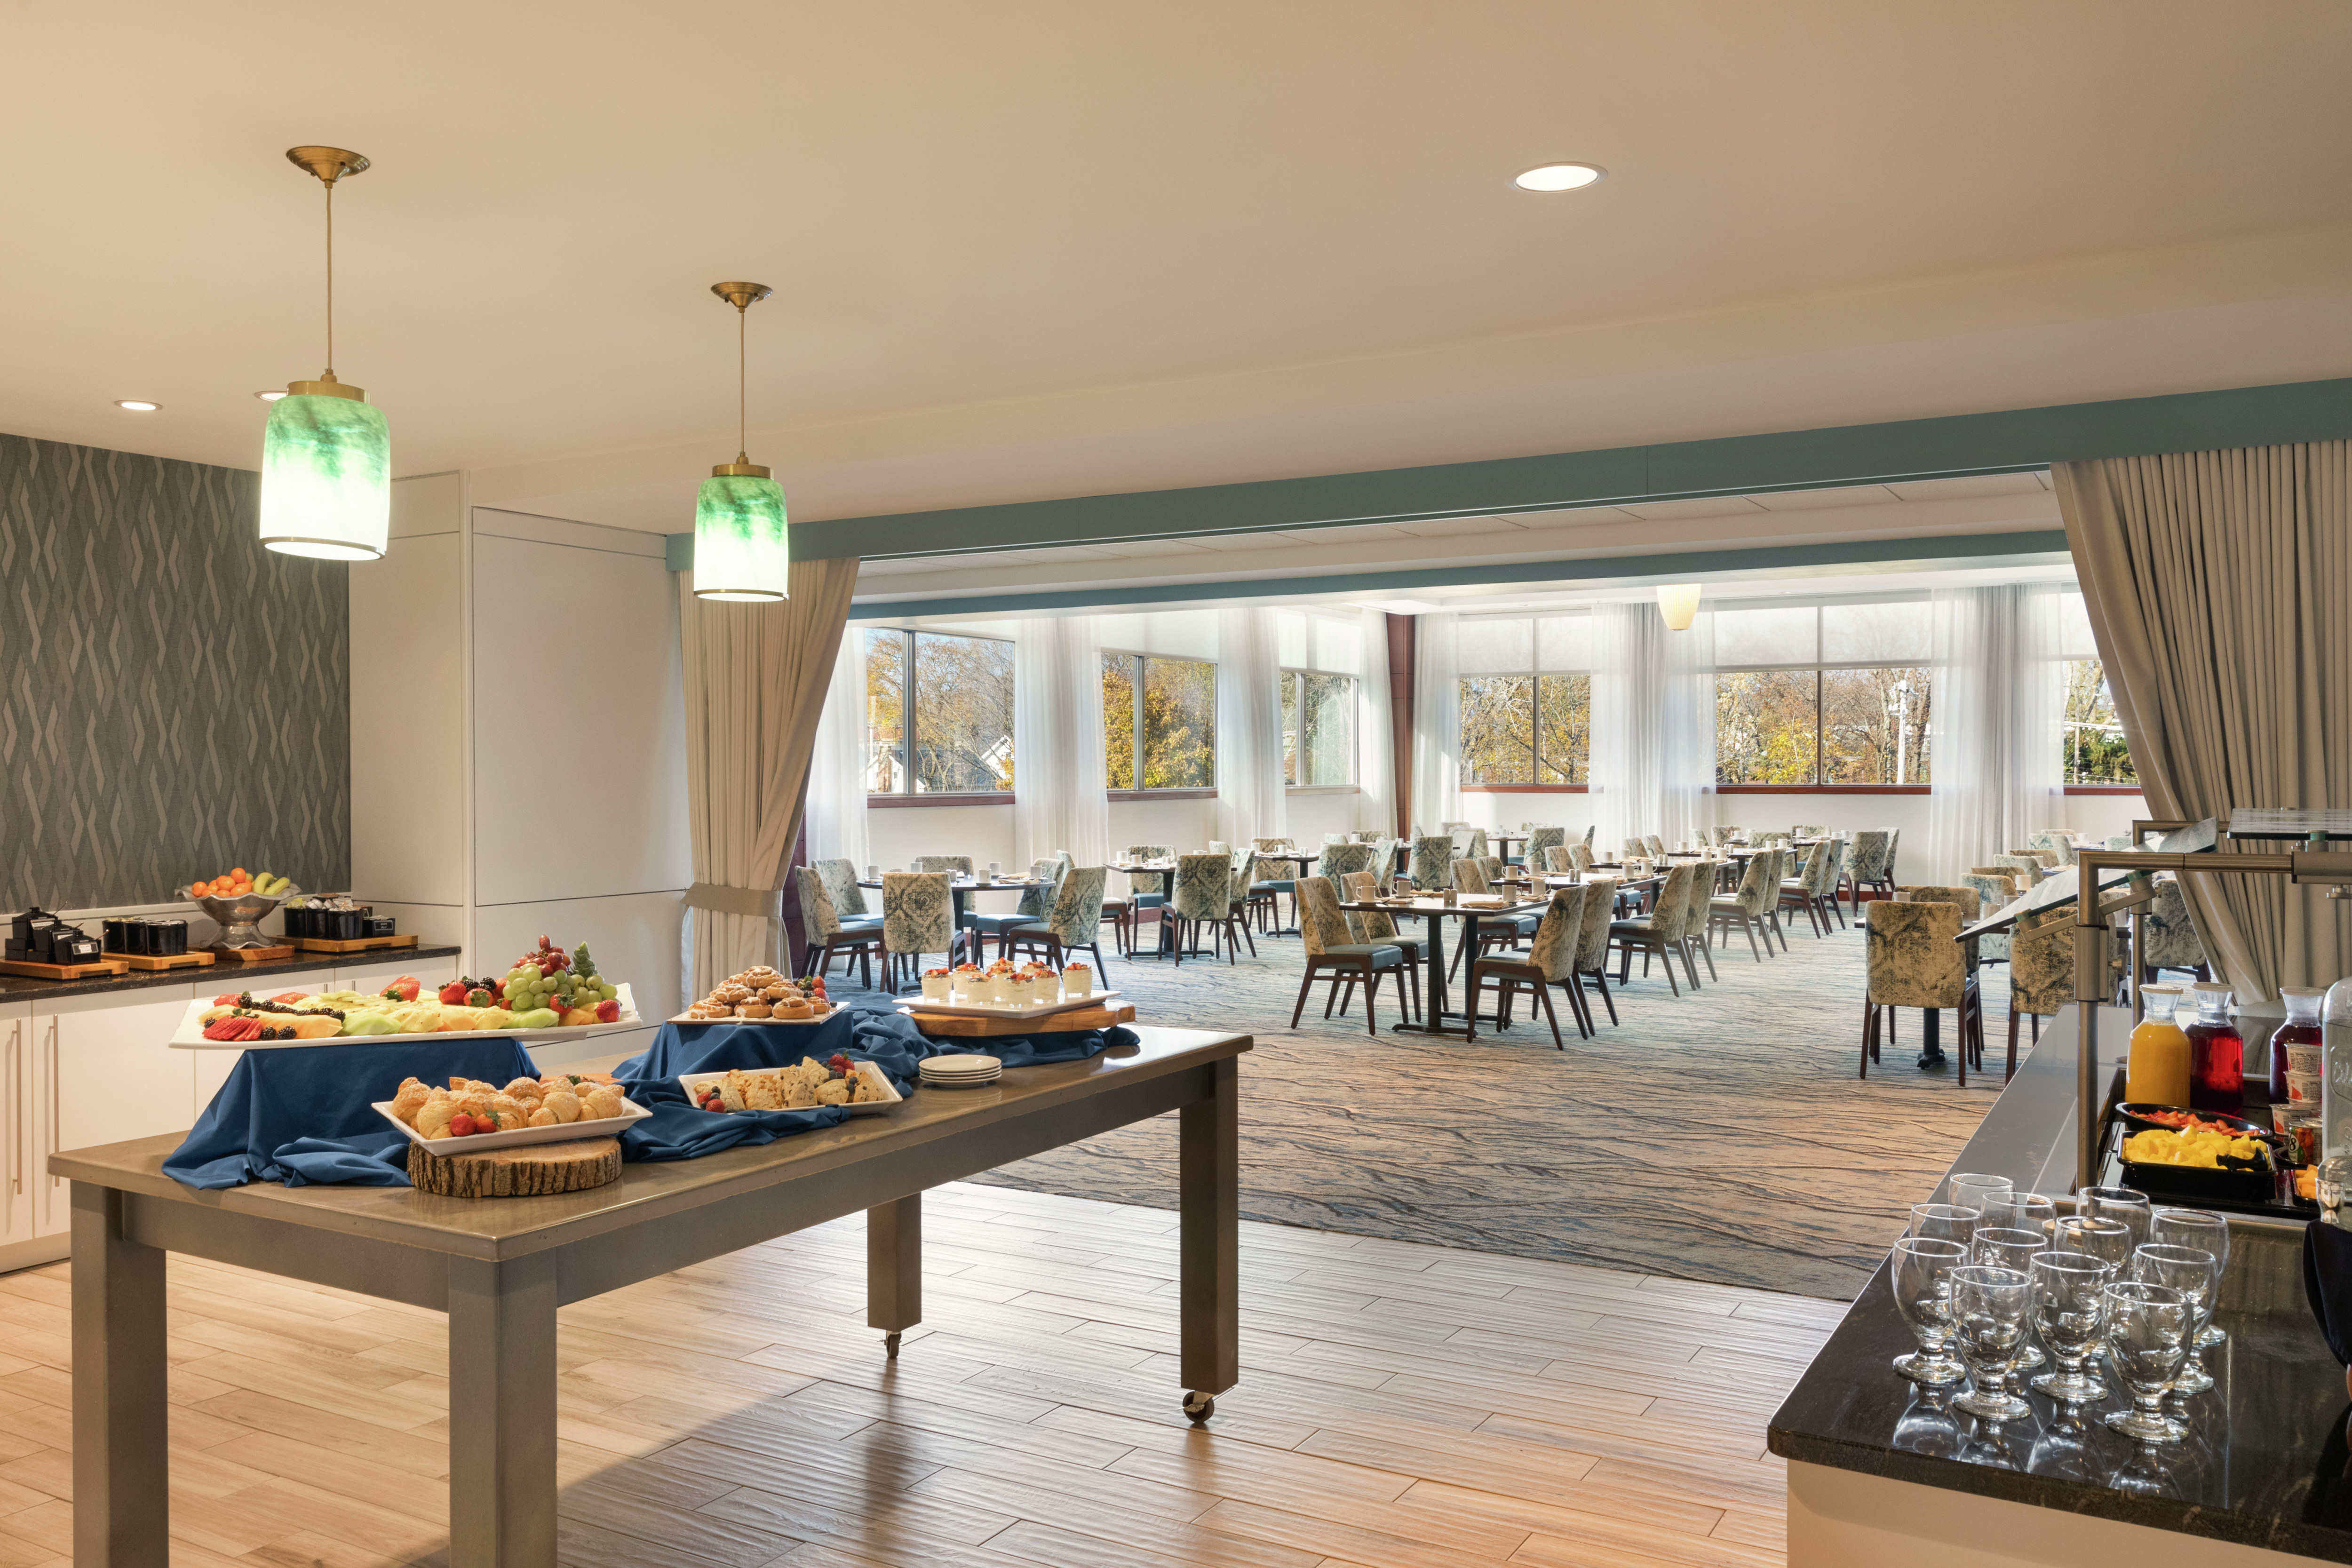 Bright breakfast area featuring complimentary buffet for guests and ample seating.